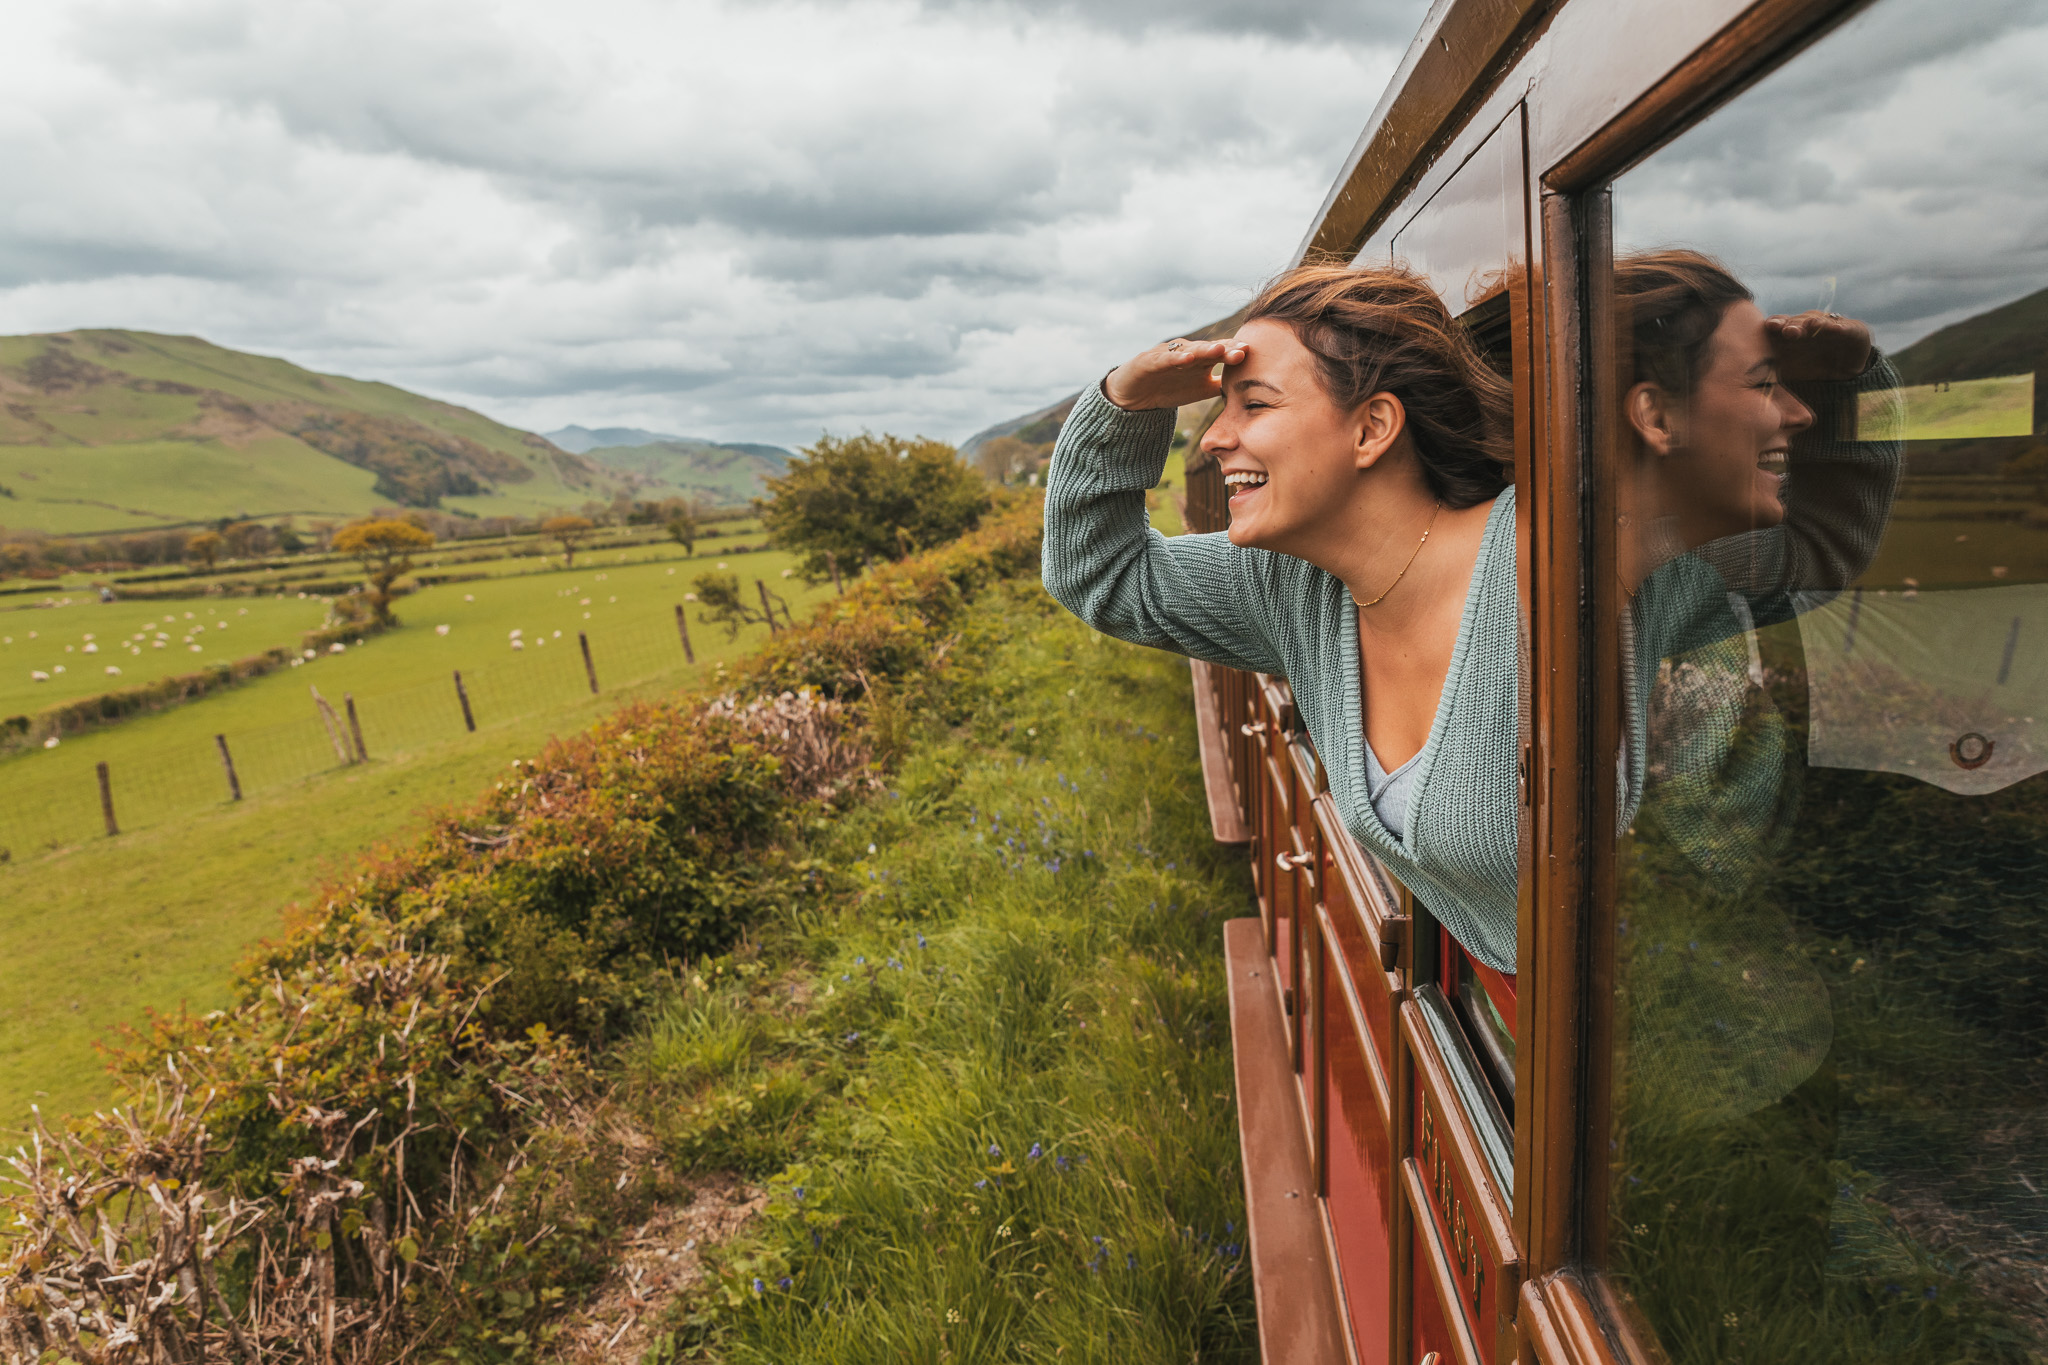 Talyllyn Steam Train // The Most Beautiful Places to Visit in Wales // #readysetjetset #wales #uk #welsh #travel #photospots #blogpost